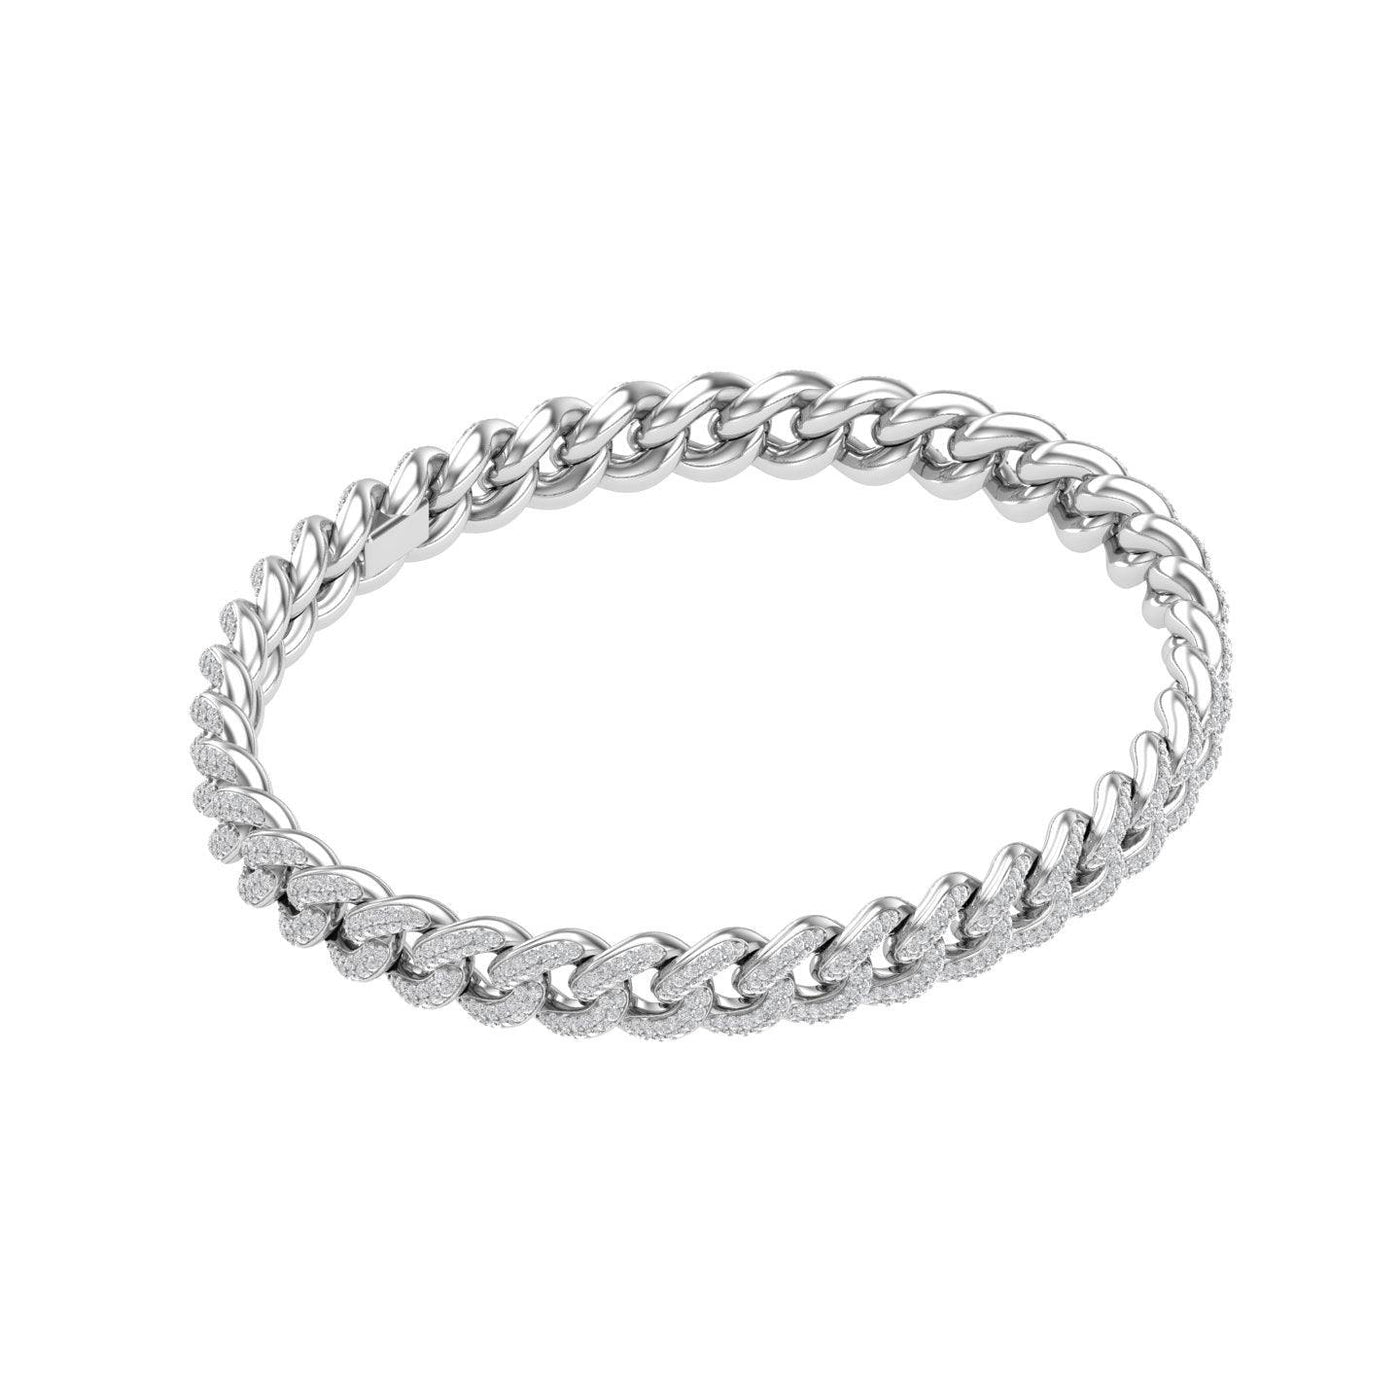 White Gold Color 9mm Cuban Bracelet Made of 925 Sterling Silver Material